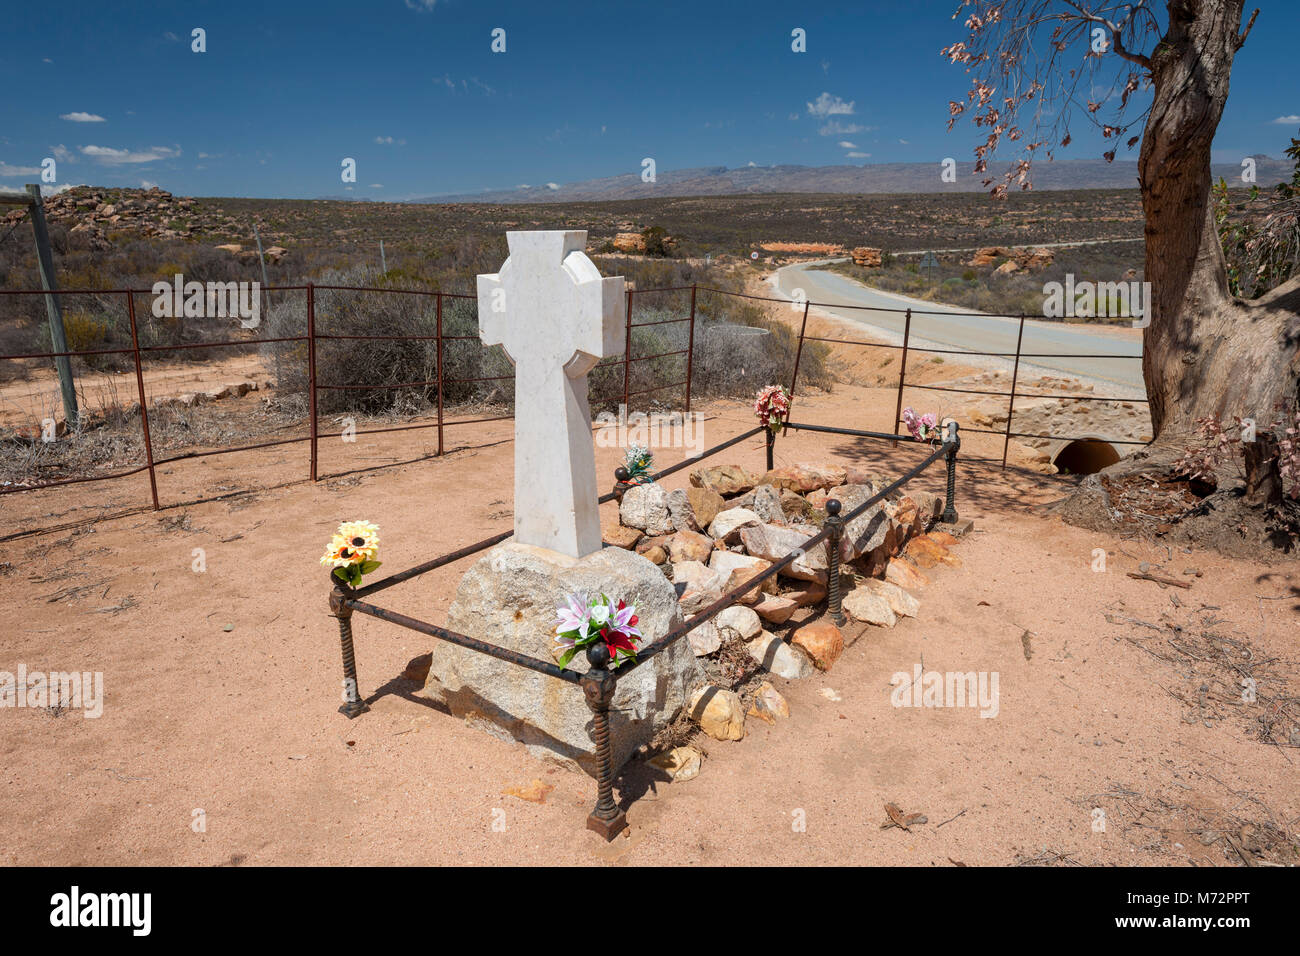 The Englishman's Grave on the side of the R364 road in the Cederberg region of the Western Cape Province in South Africa. Stock Photo